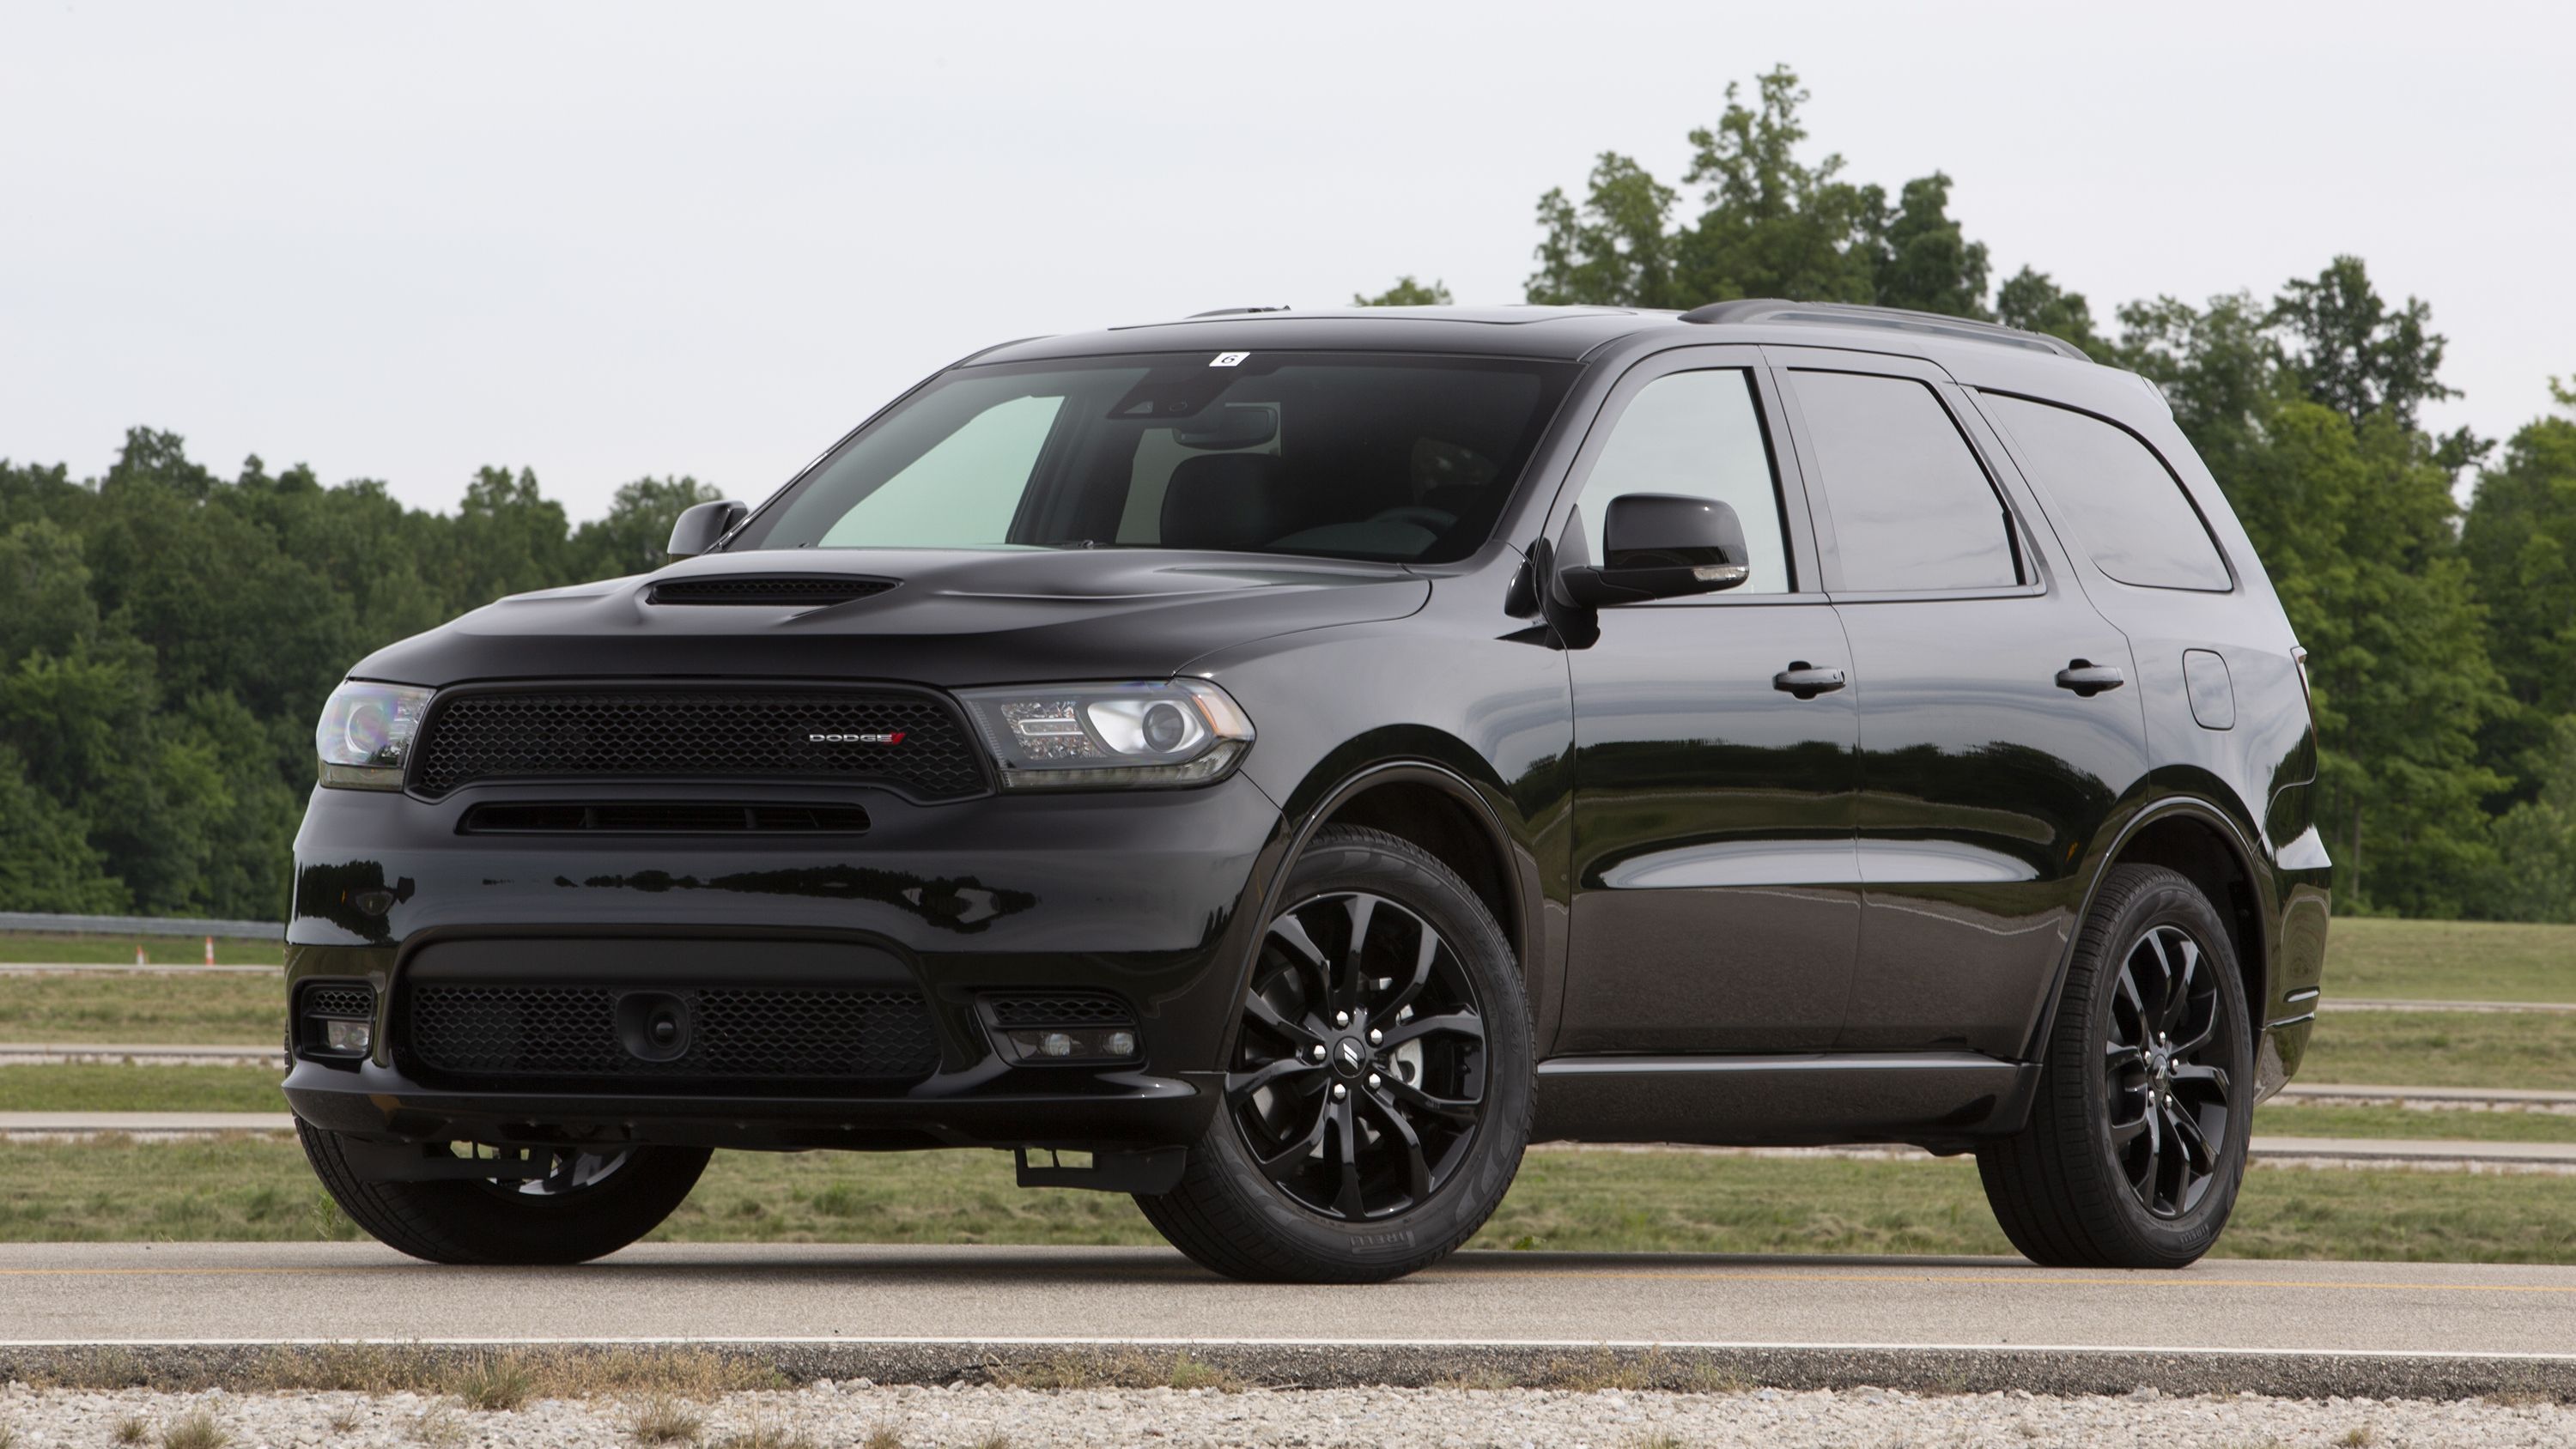 2018 The 2019 Durango Is Not Something You Can Just 'Dodge' Away